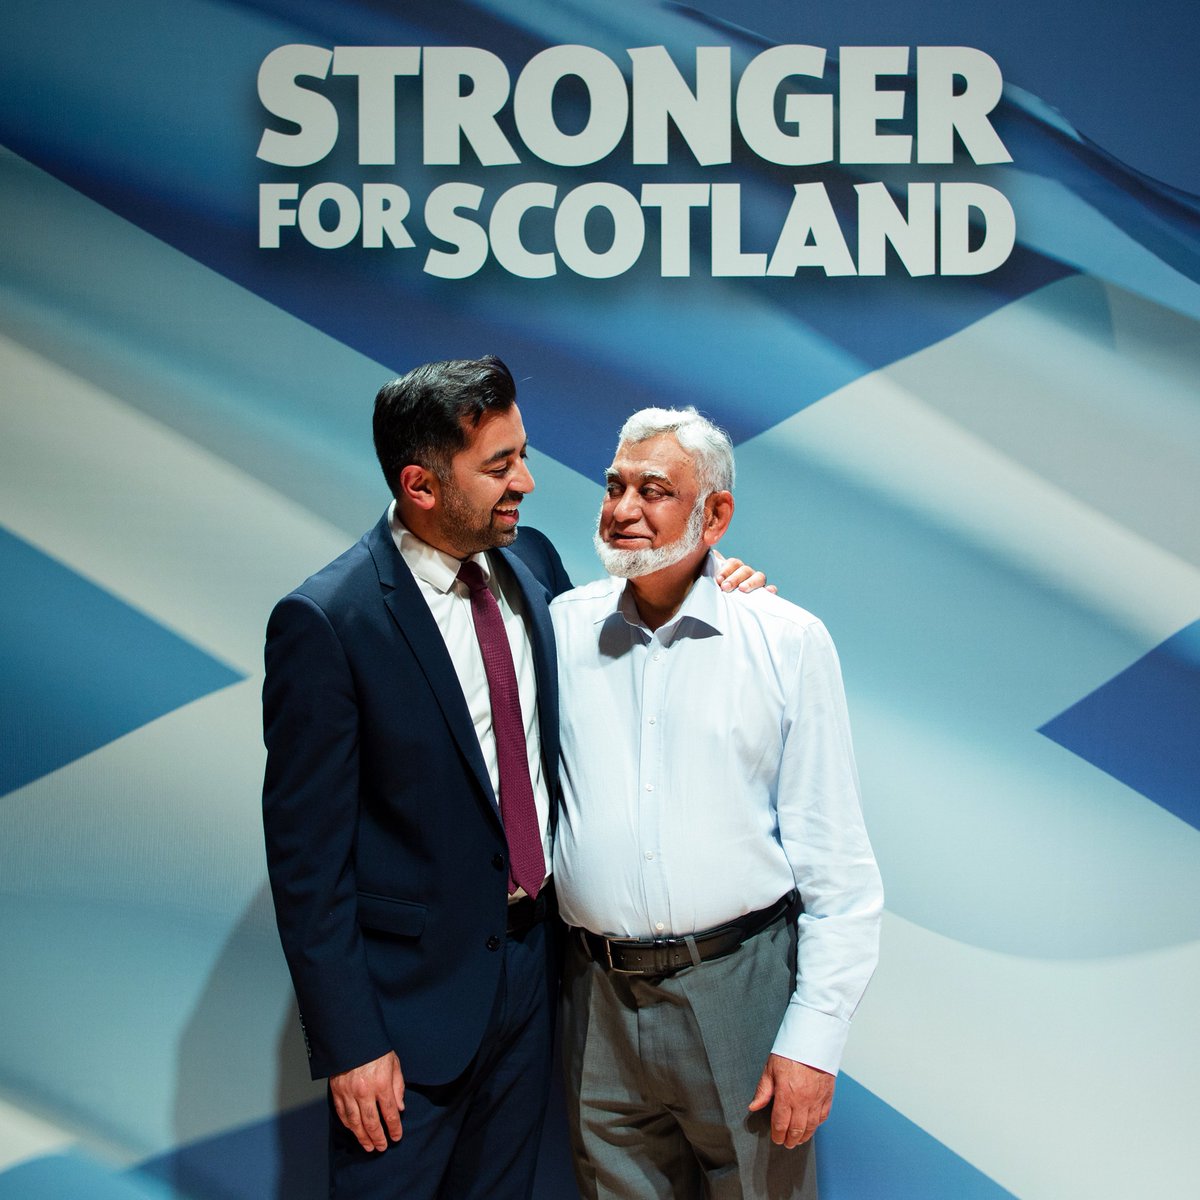 Having my father join me on stage at the SNP’s Independence Convention meant the world to me.

He joined @theSNP in the '70s and has never doubted his belief in the cause of independence and the party I’m honoured to now lead.

So grateful for my family's support & encouragement.